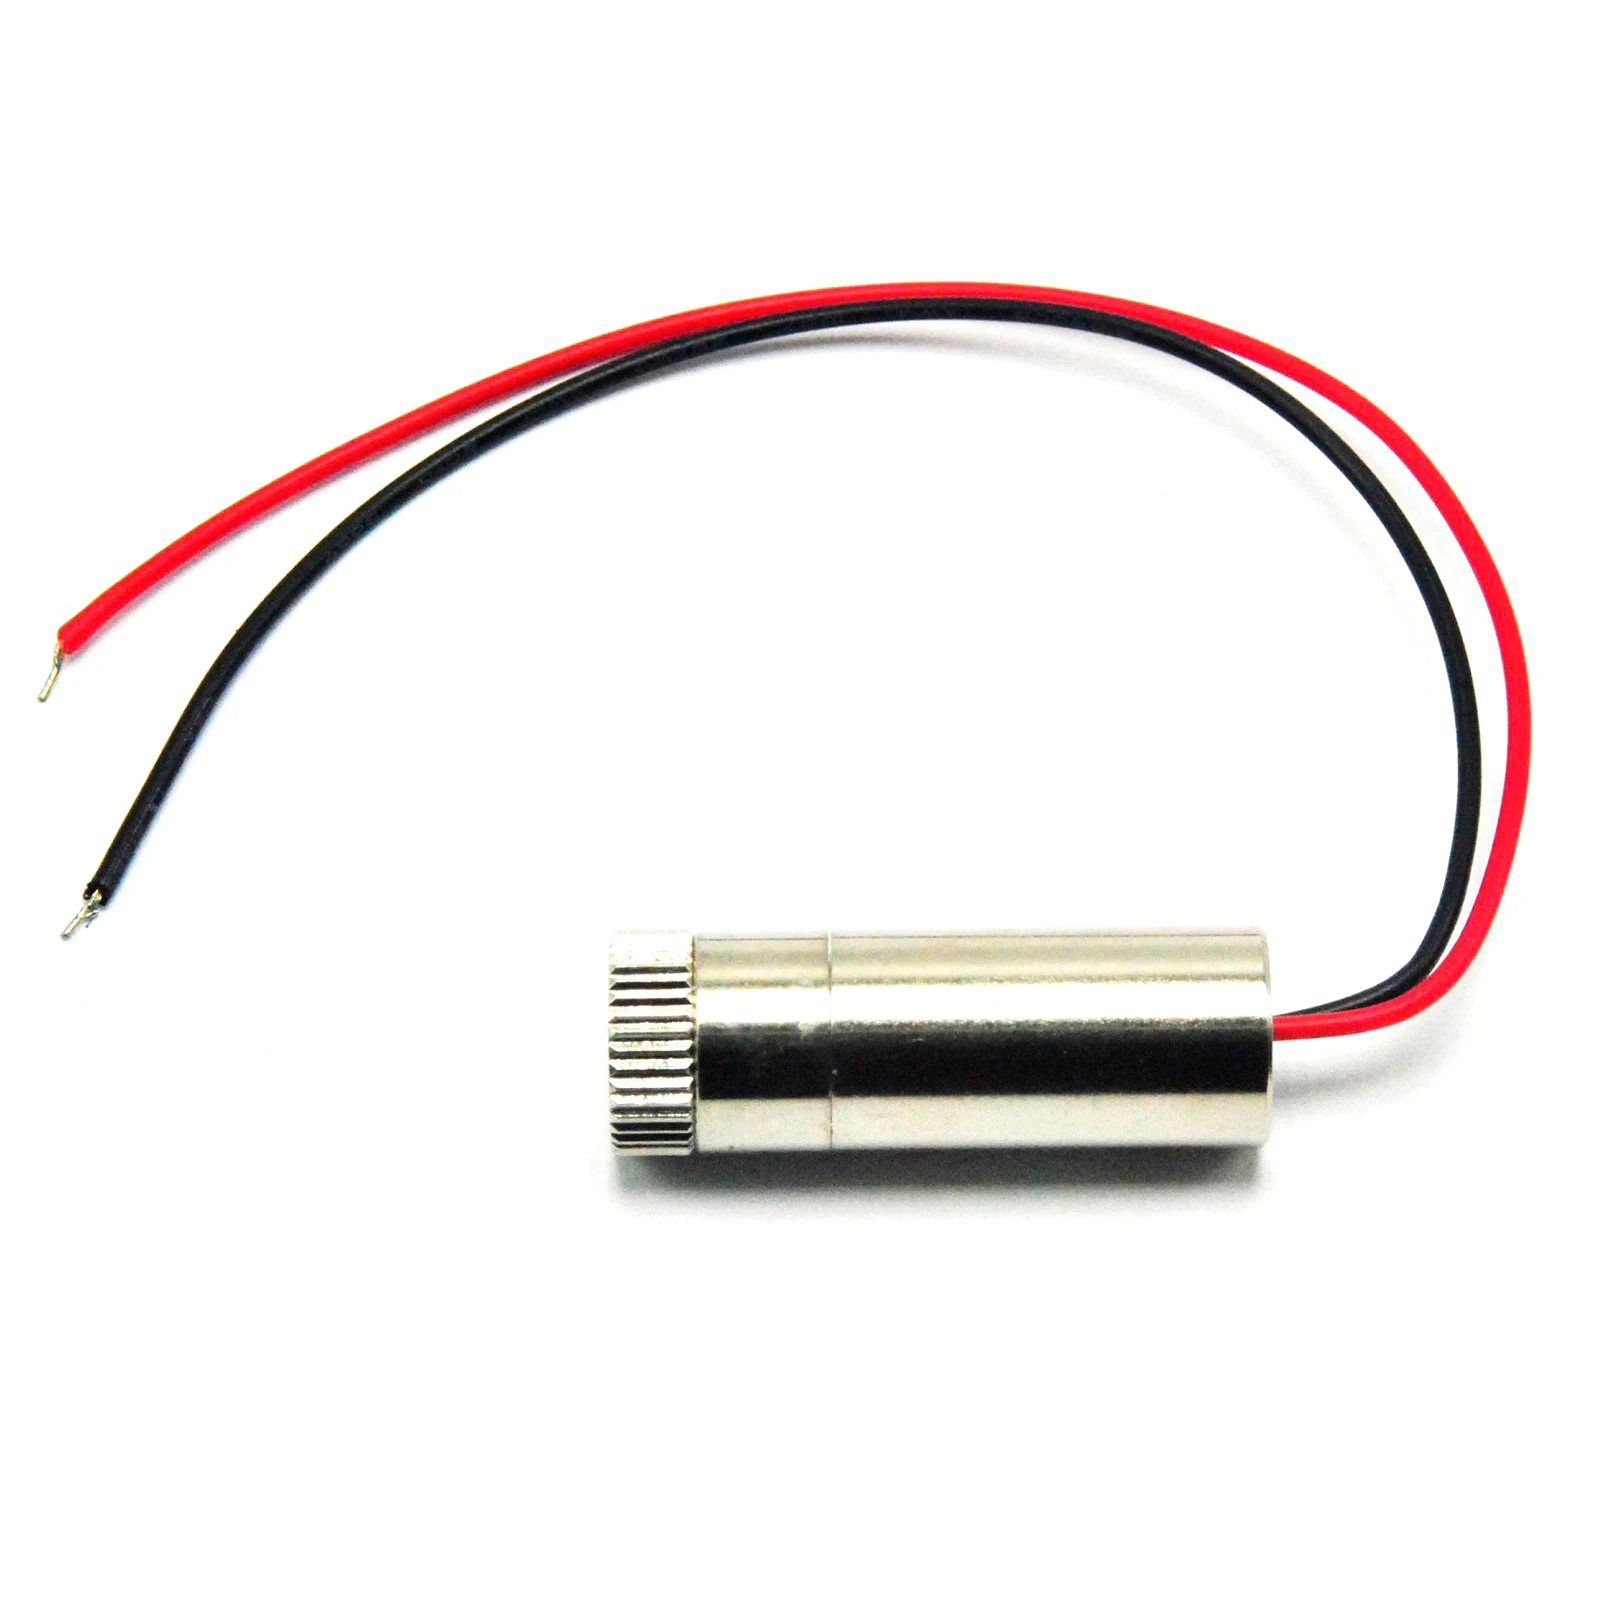 675nm 3.5mw Red Laser Diode Module Dot / Line / Cross Shape Lasers 12x35mm industrial lab 3 5mw 675nm laser diode lazer dot module 12x35mm